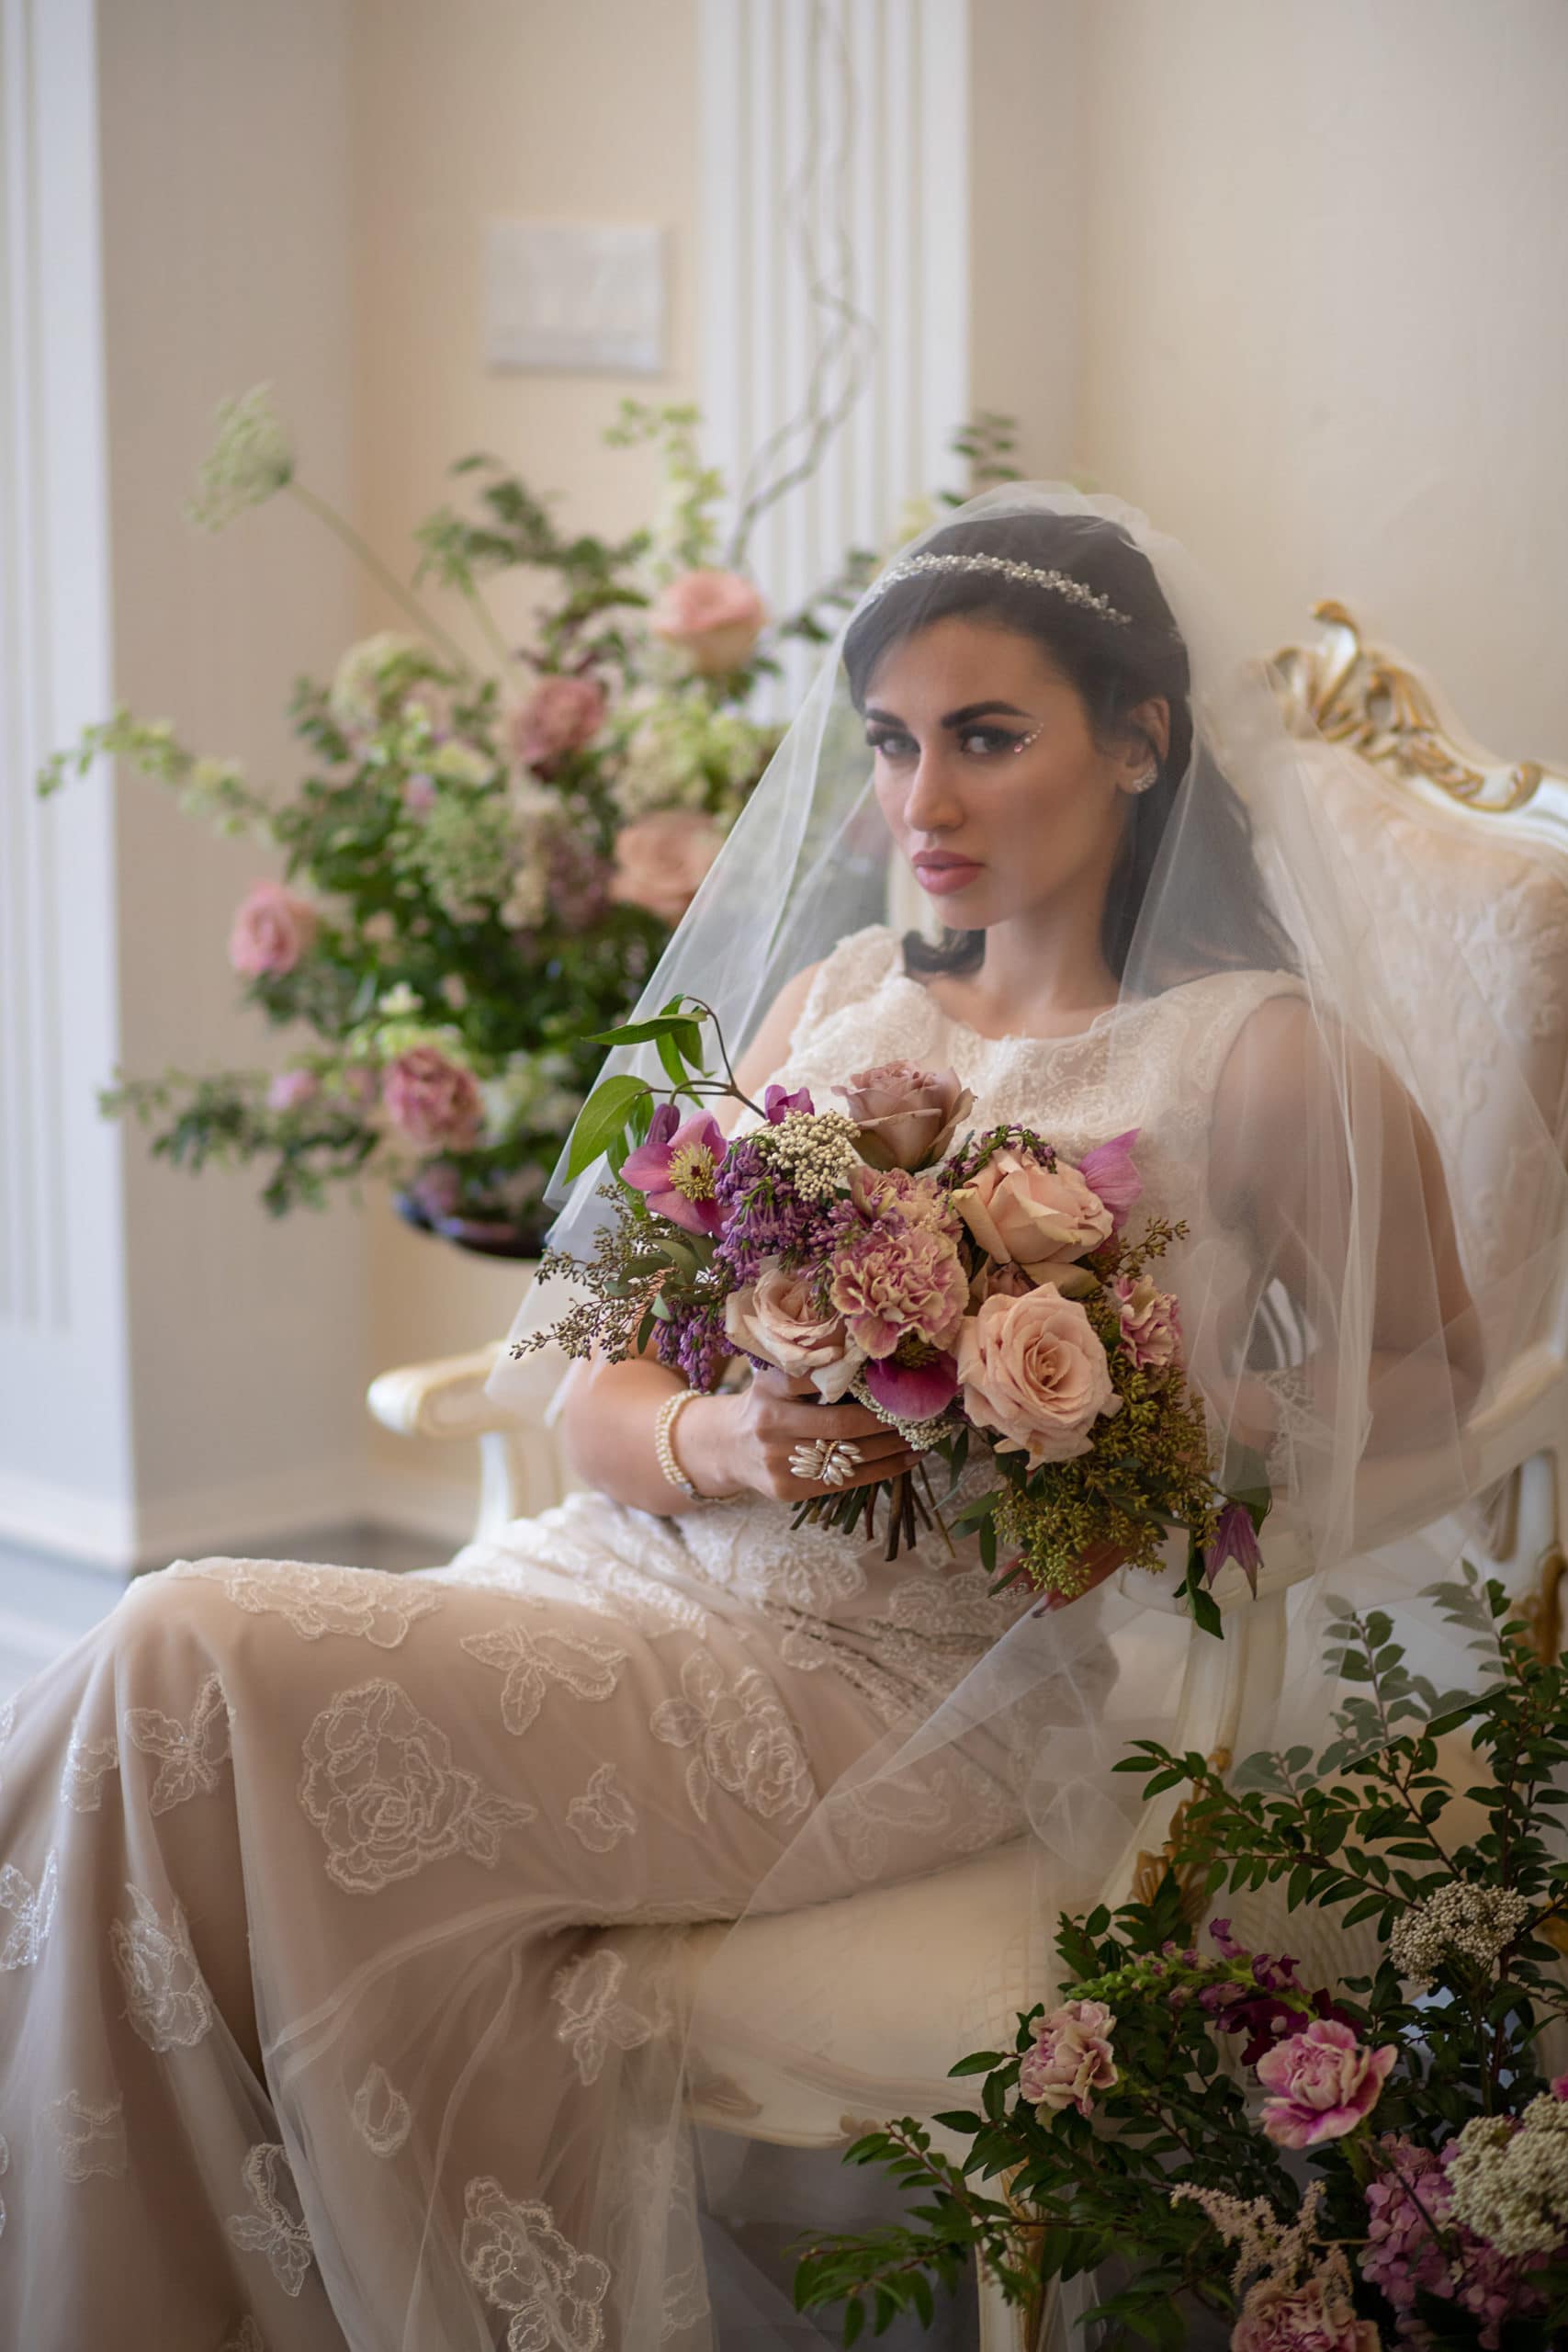 Why Is An Experienced Bridal Makeup Artist Worth the Money?